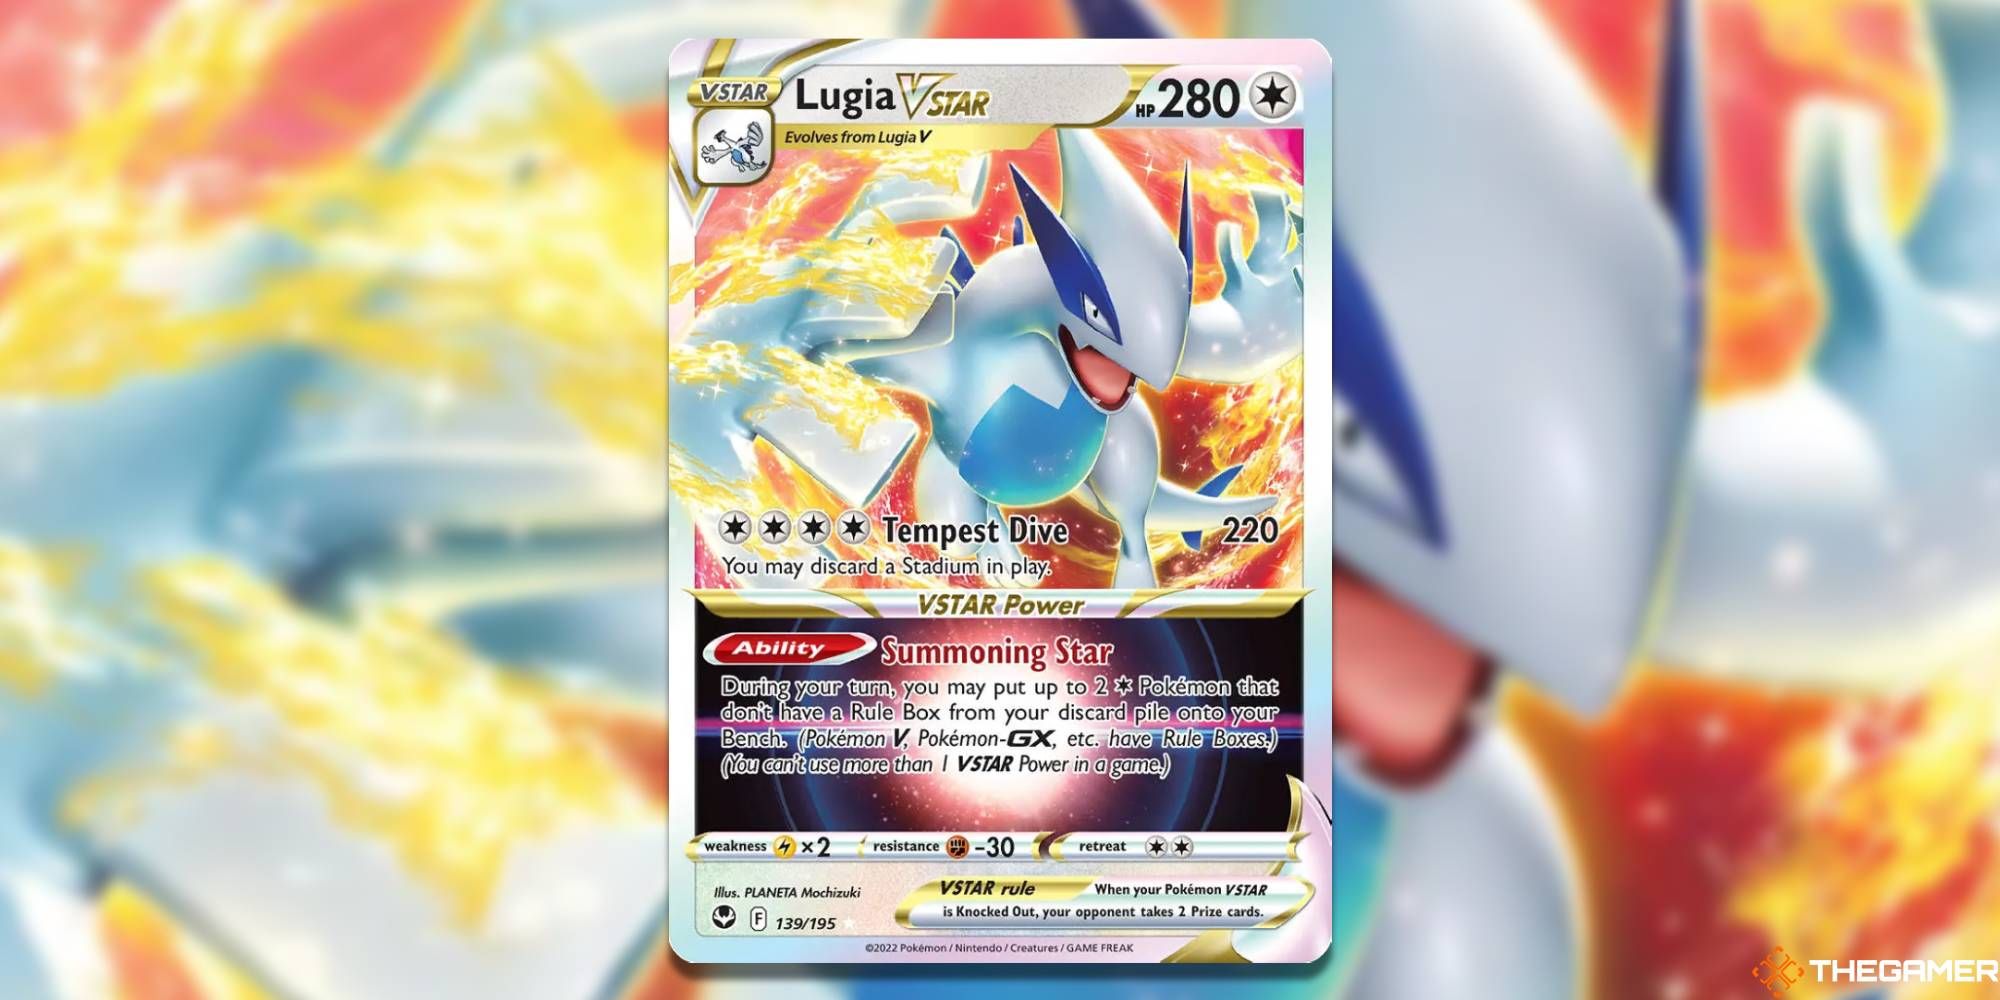 Lugia VStar from the Pokemon TCG, with blurred background